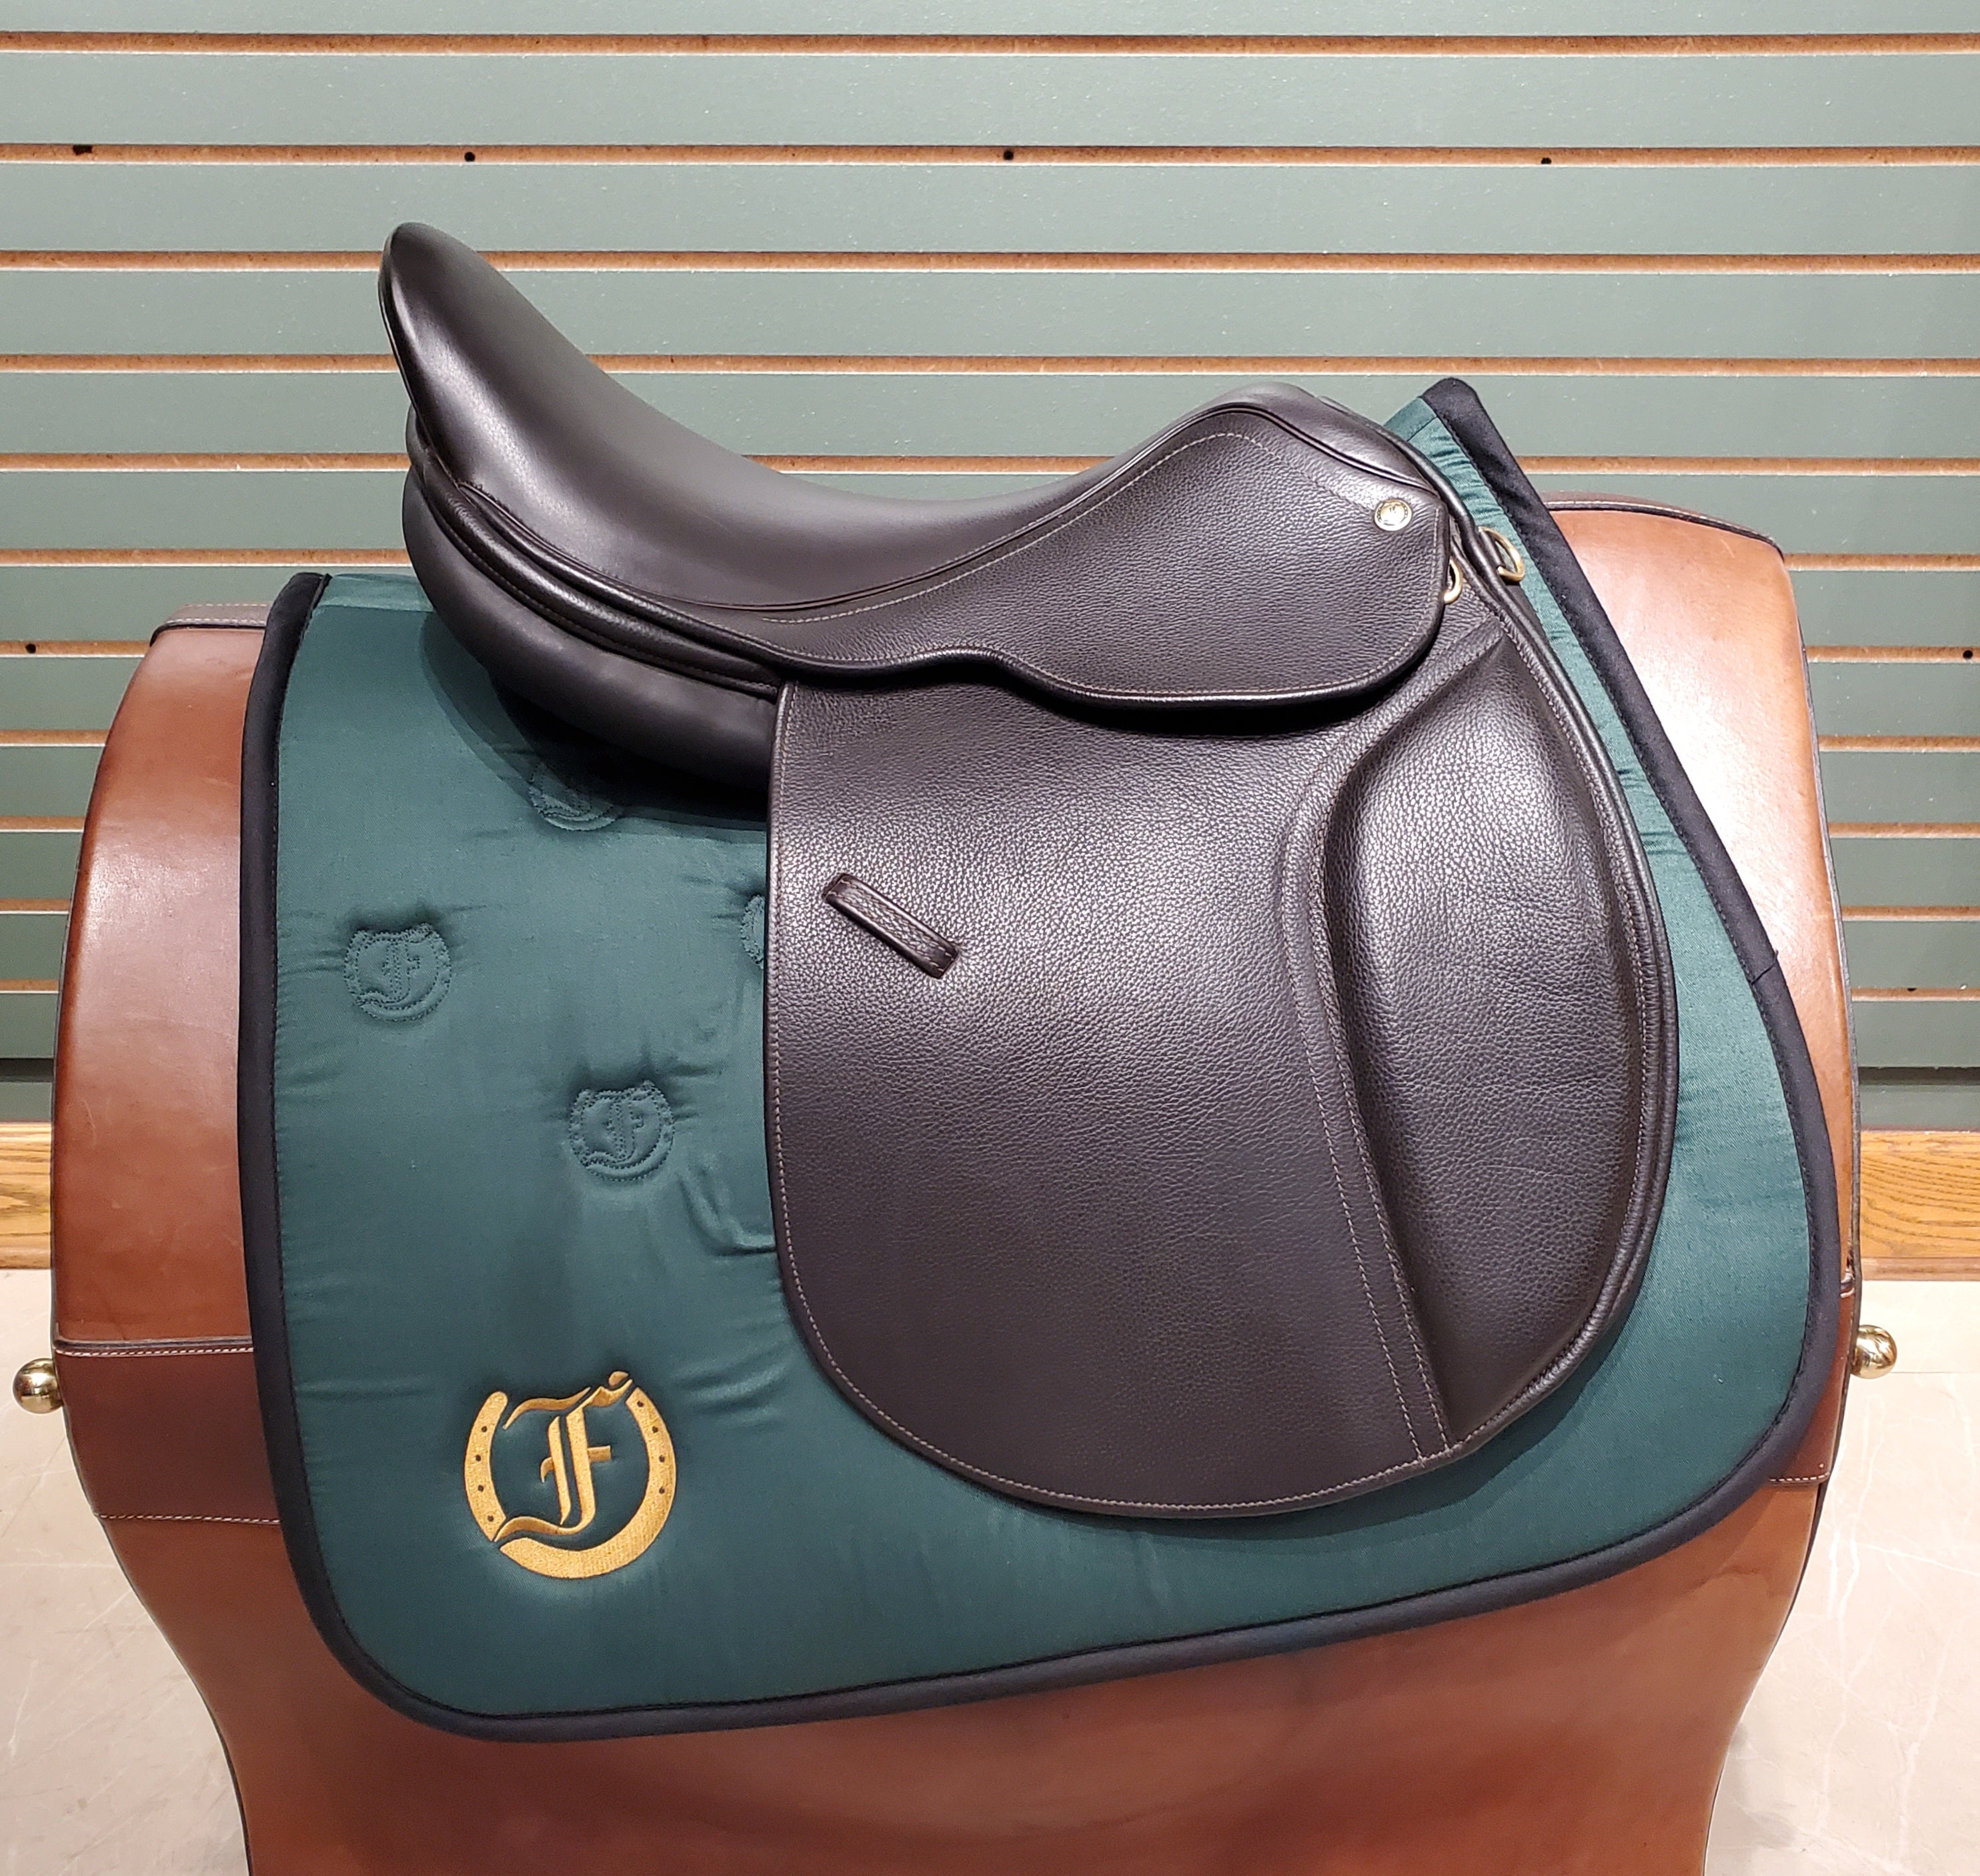 Previously Used Centennial Hunter Saddle 18"